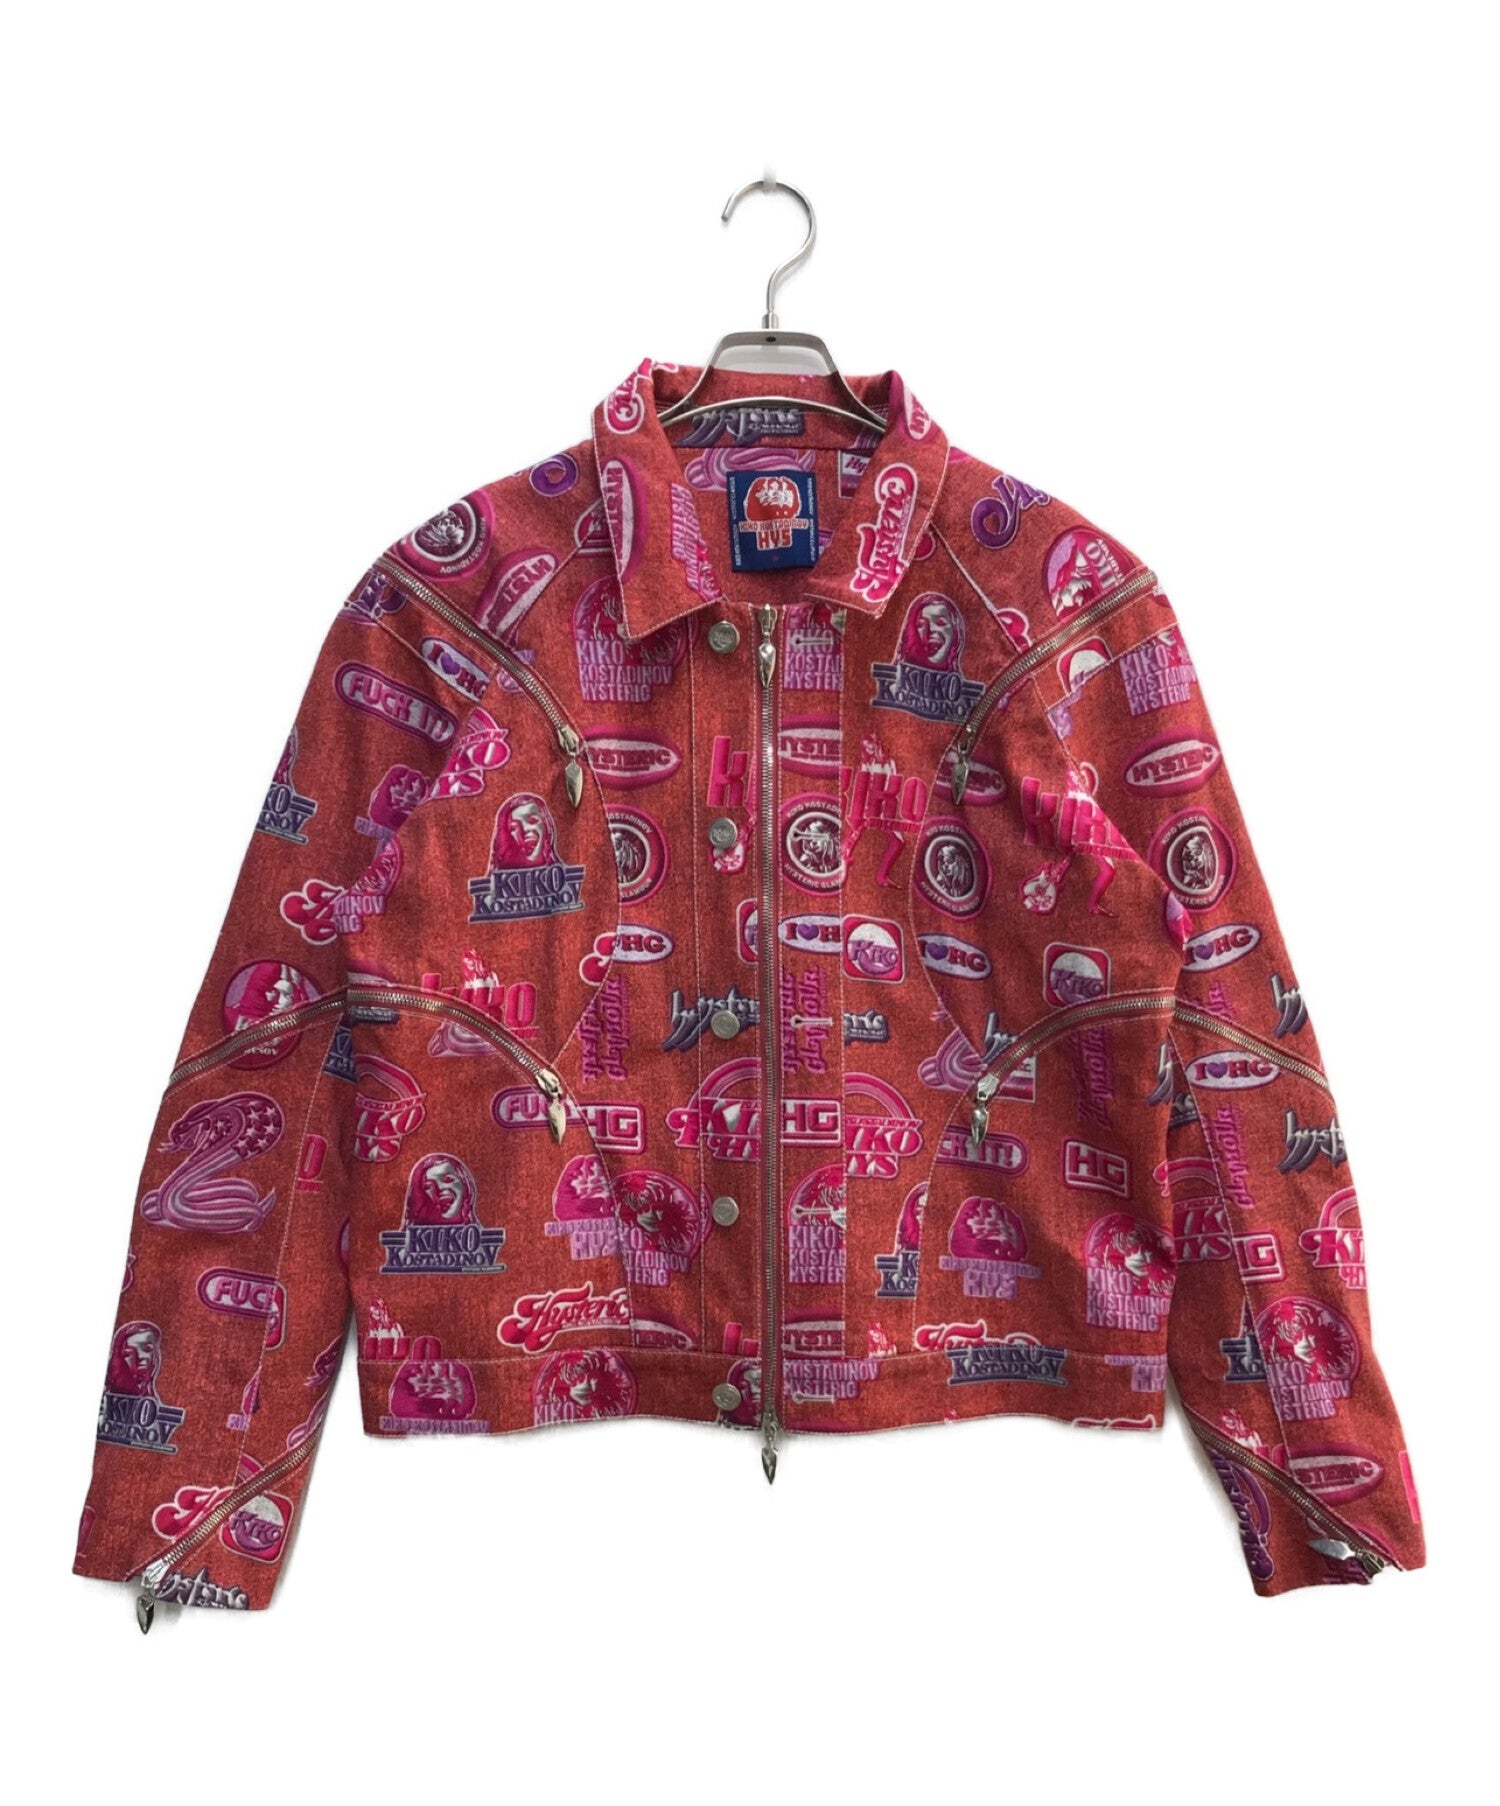 Hysteric Glamour HG ZIP MOTO JACKET | Archive Factory